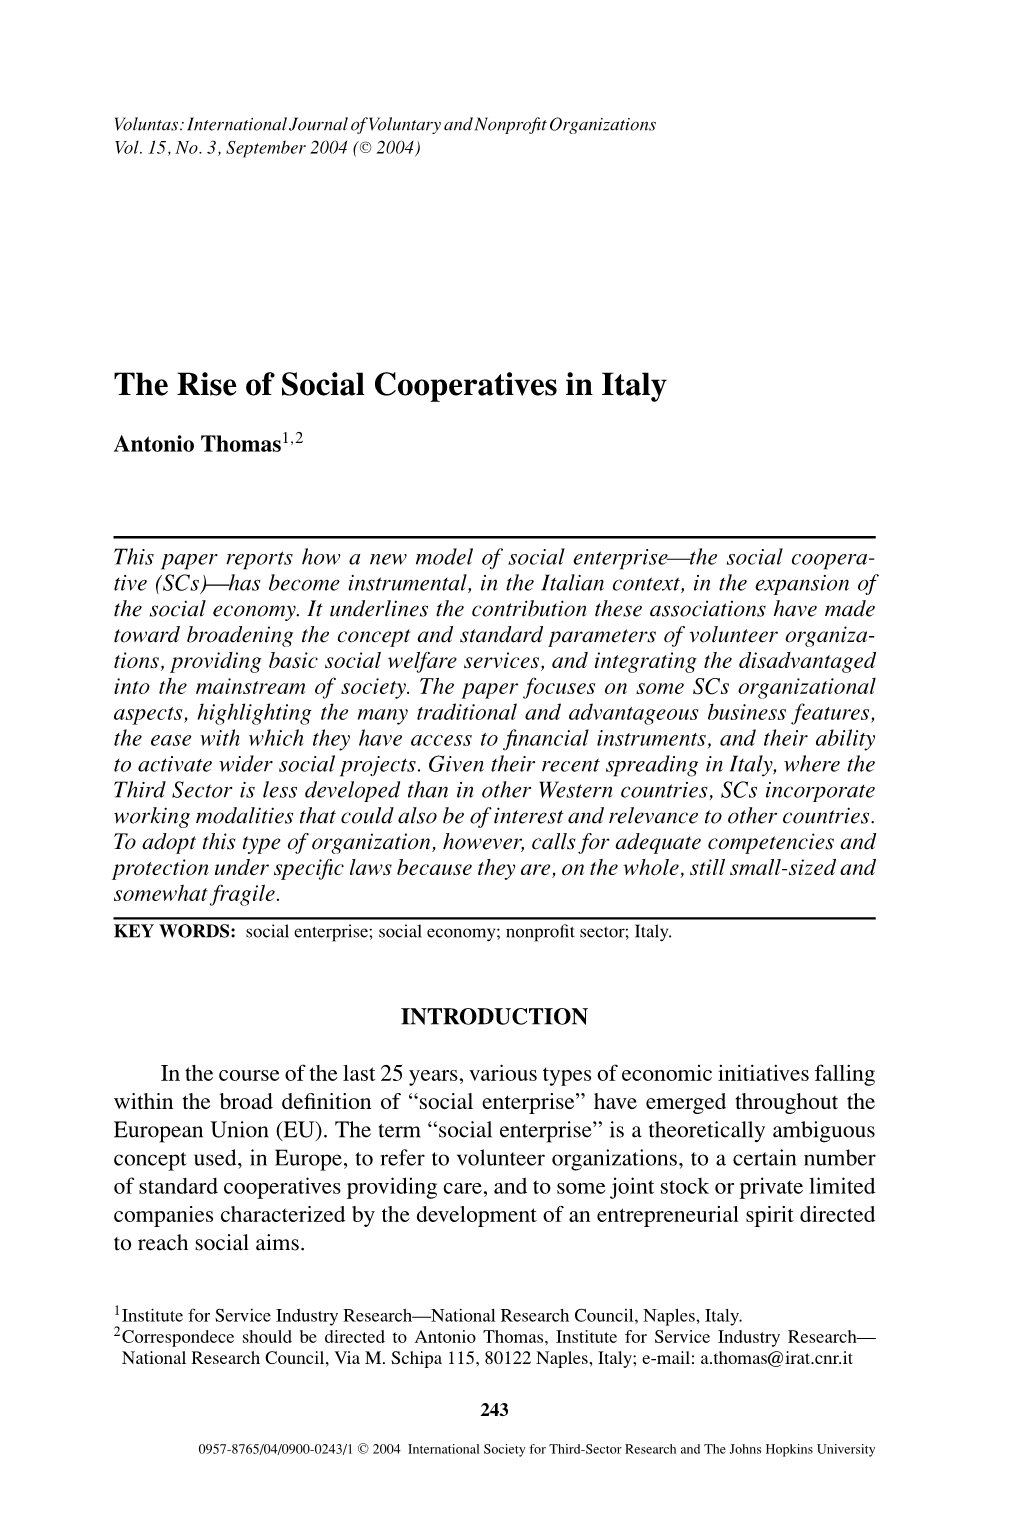 The Rise of Social Cooperatives in Italy